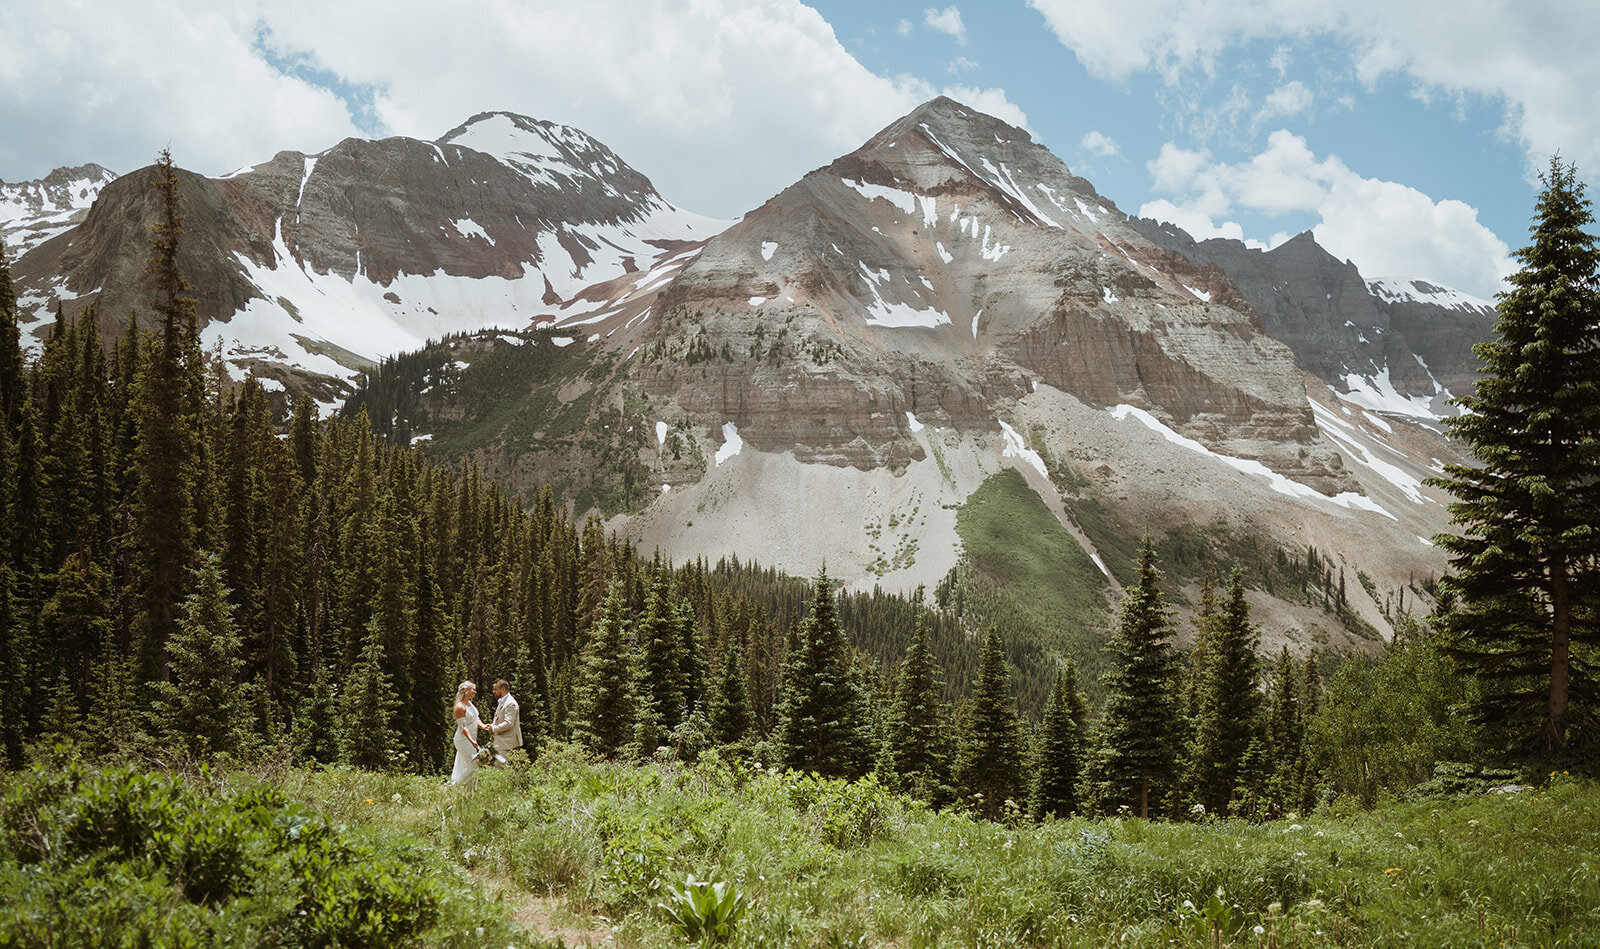 bride and groom are standing in the Telluride mountains looking at each other as they read their vows. their dog is sitting at their feet. the bride is in a white dress with sleeves and the groom is in a tan suit. it is sunny with large mountains in the backdrop.